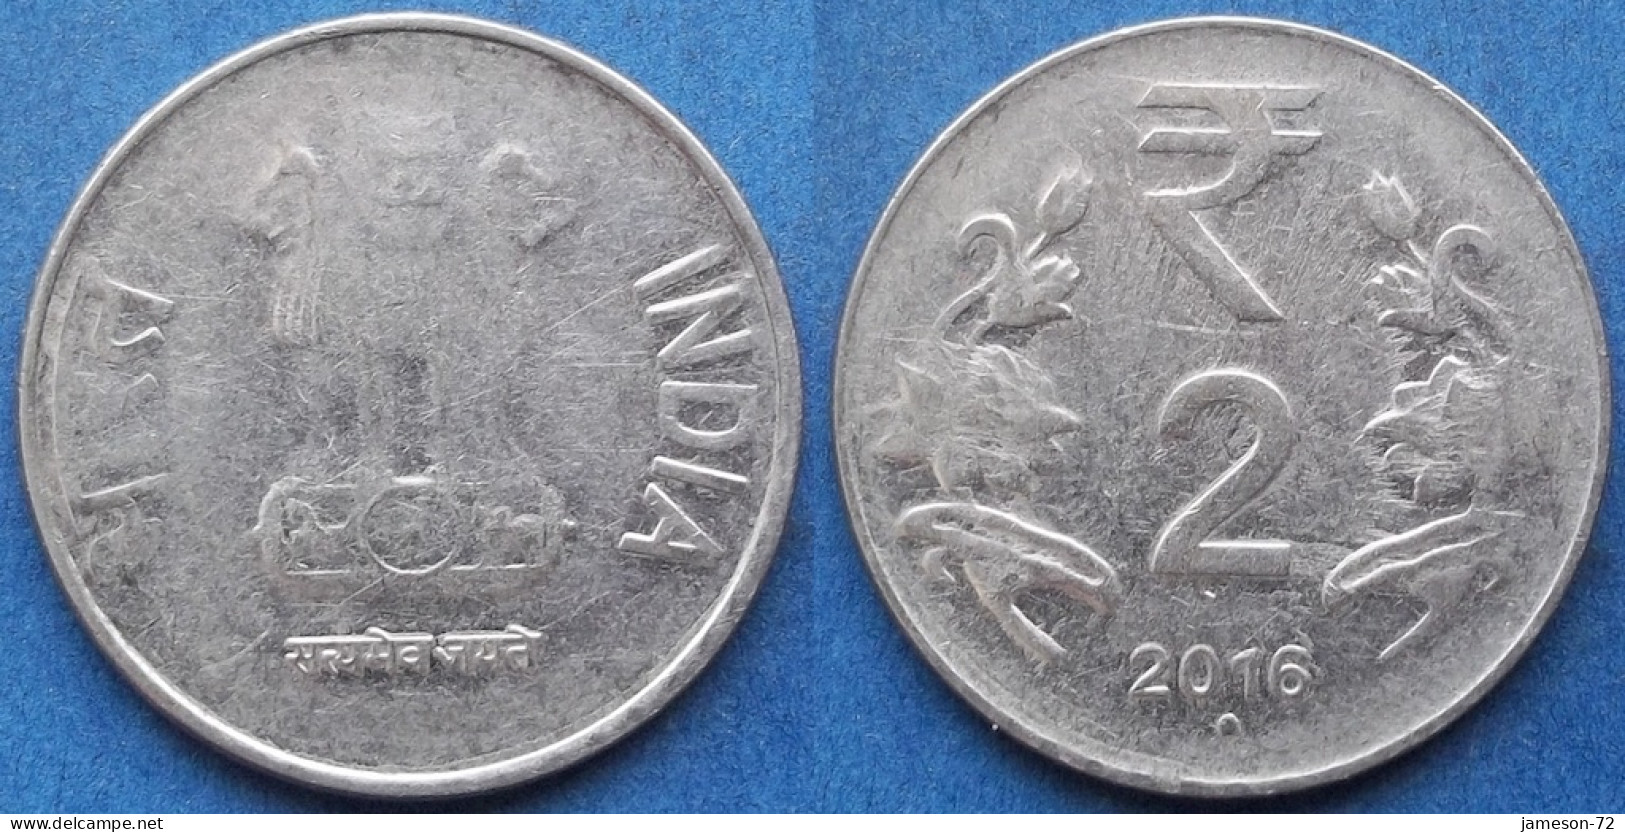 INDIA - 2 Rupees 2016 "Lotus Flowers" KM# 395 Republic Decimal Coinage (1957) - Edelweiss Coins - Georgia